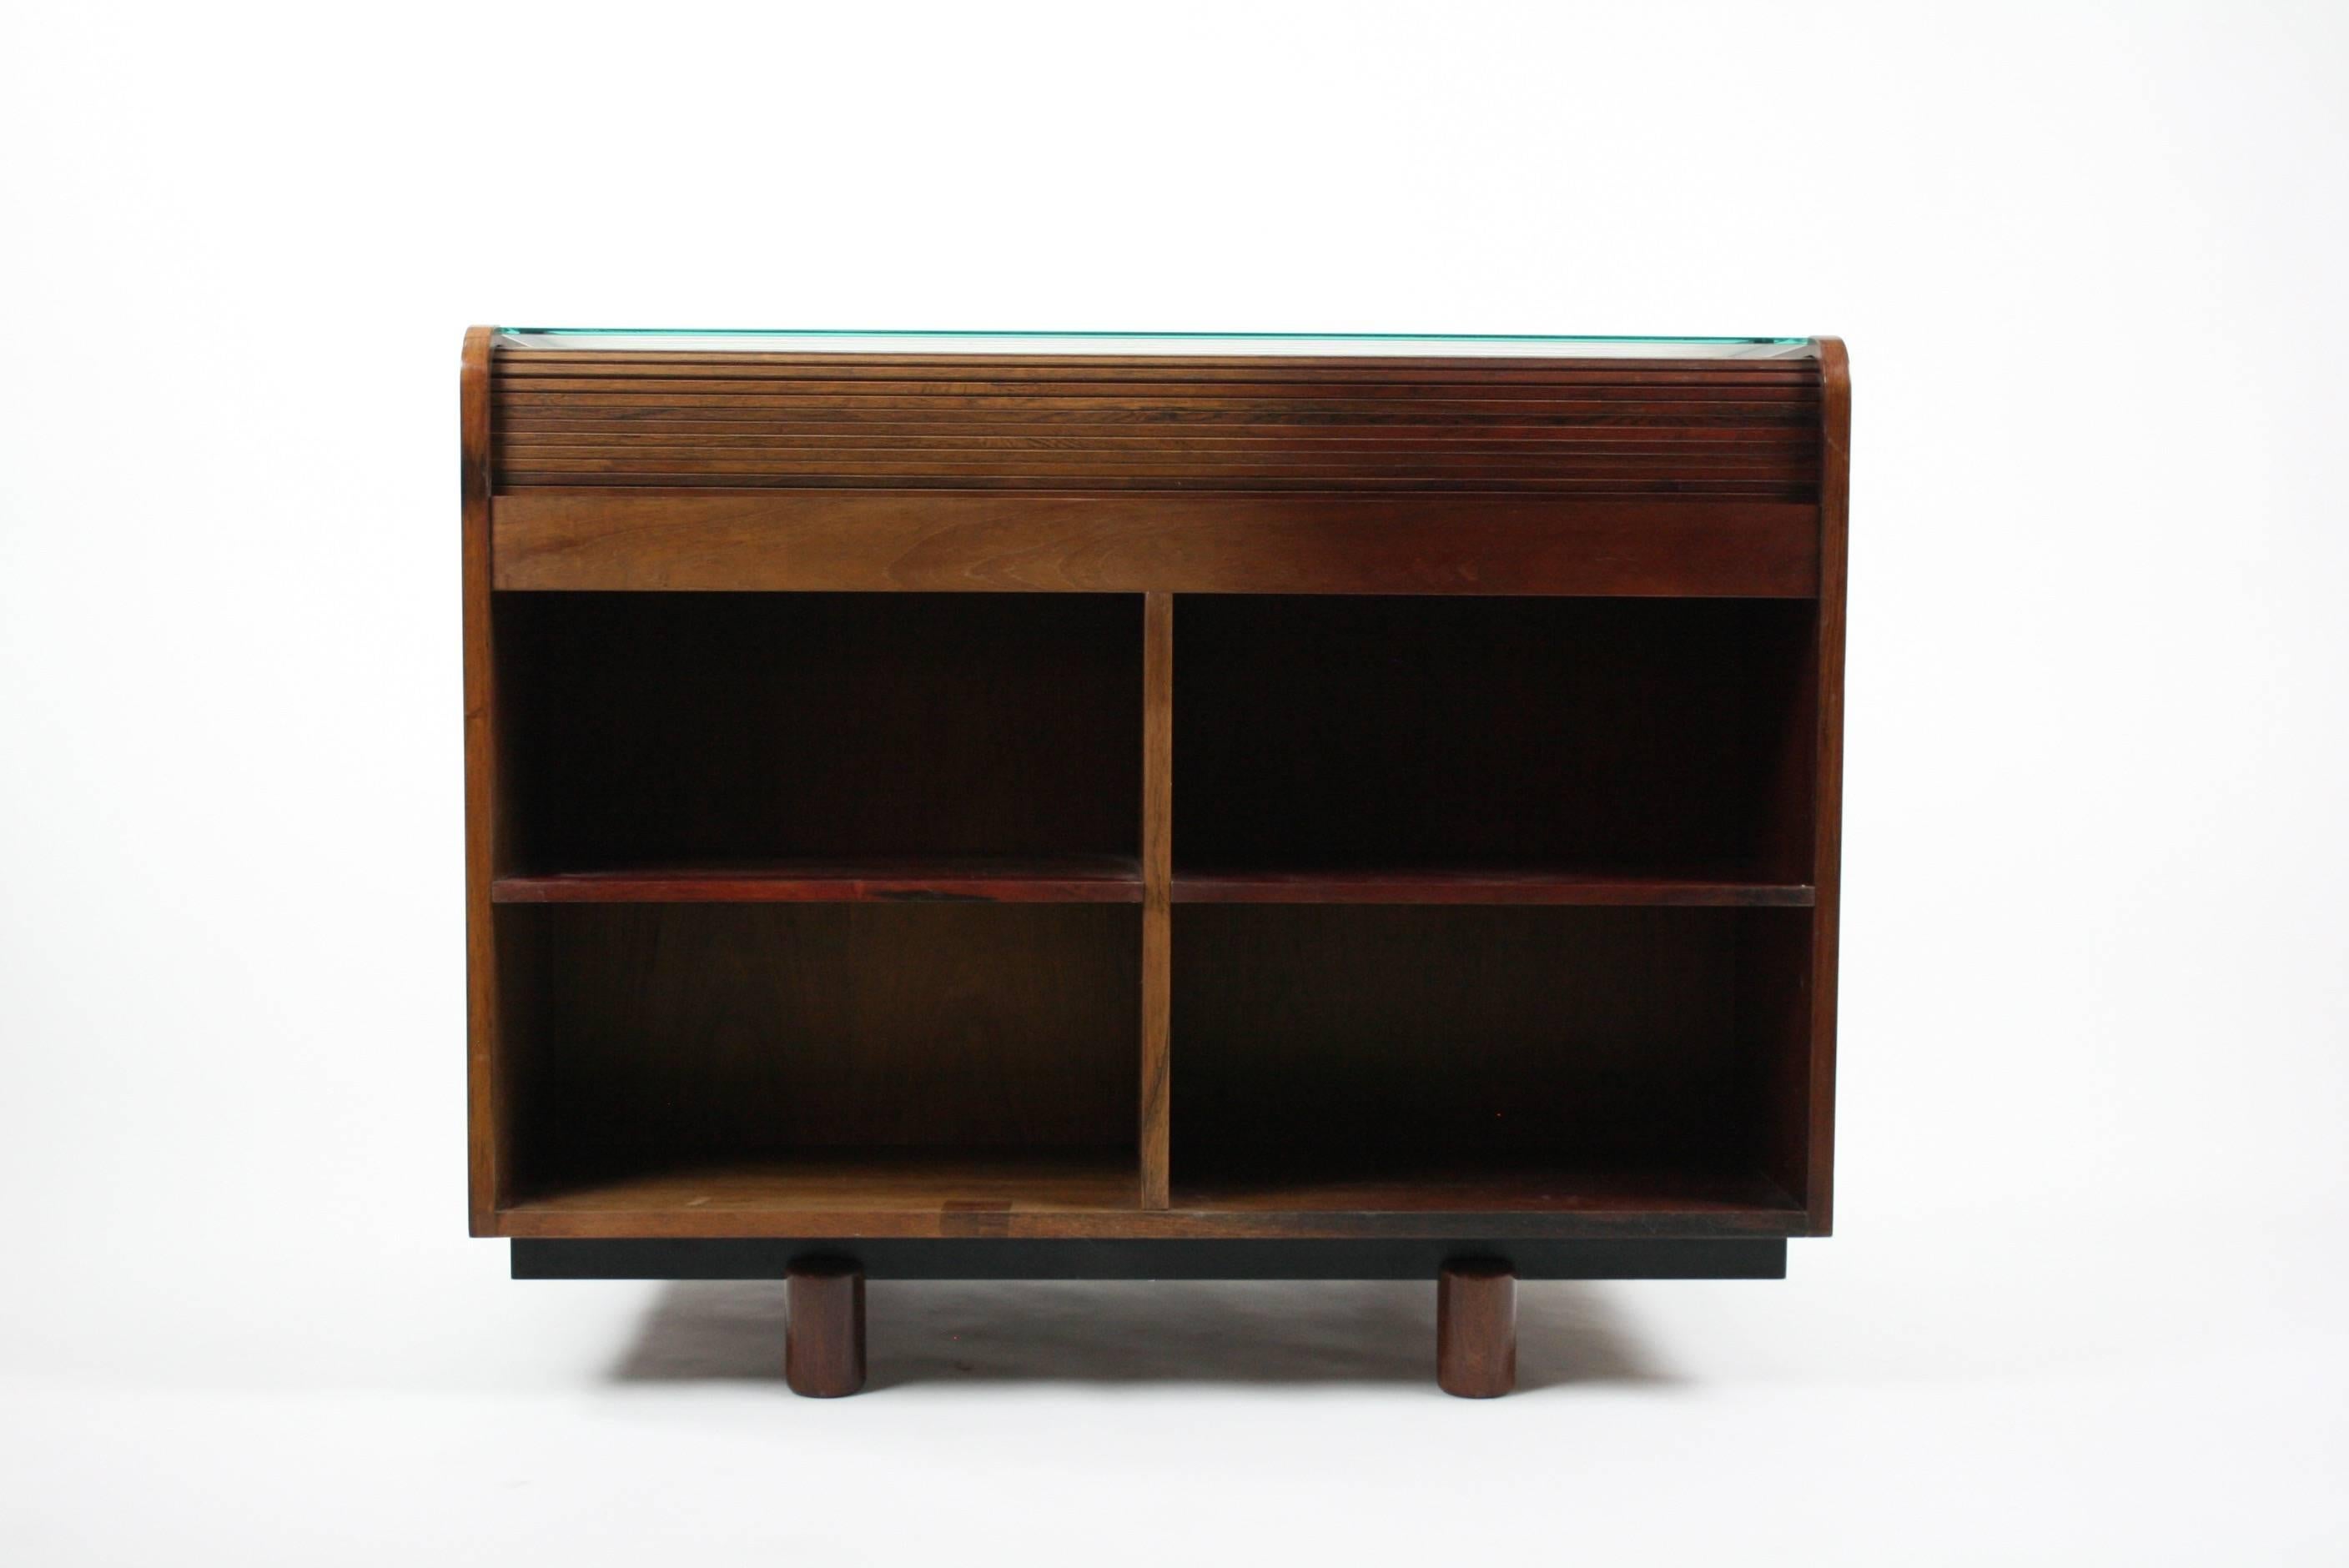 Mid-20th Century Gianfranco Frattini Desk with Roll Top in Rosewood, circa 1962 for Bernini Italy